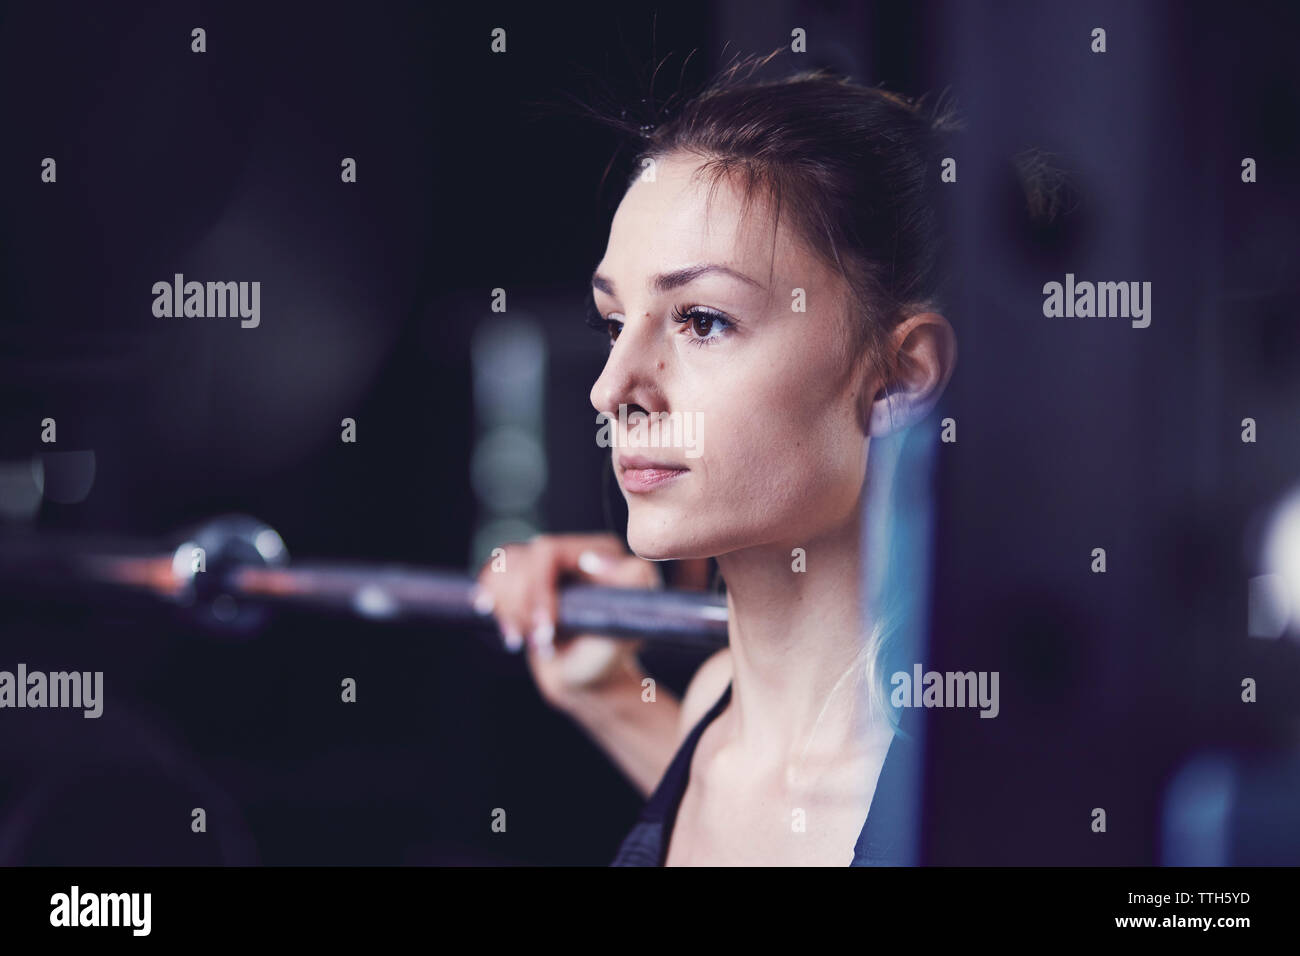 Portrait of young woman looking ahead with barbell at fitness centre Stock Photo